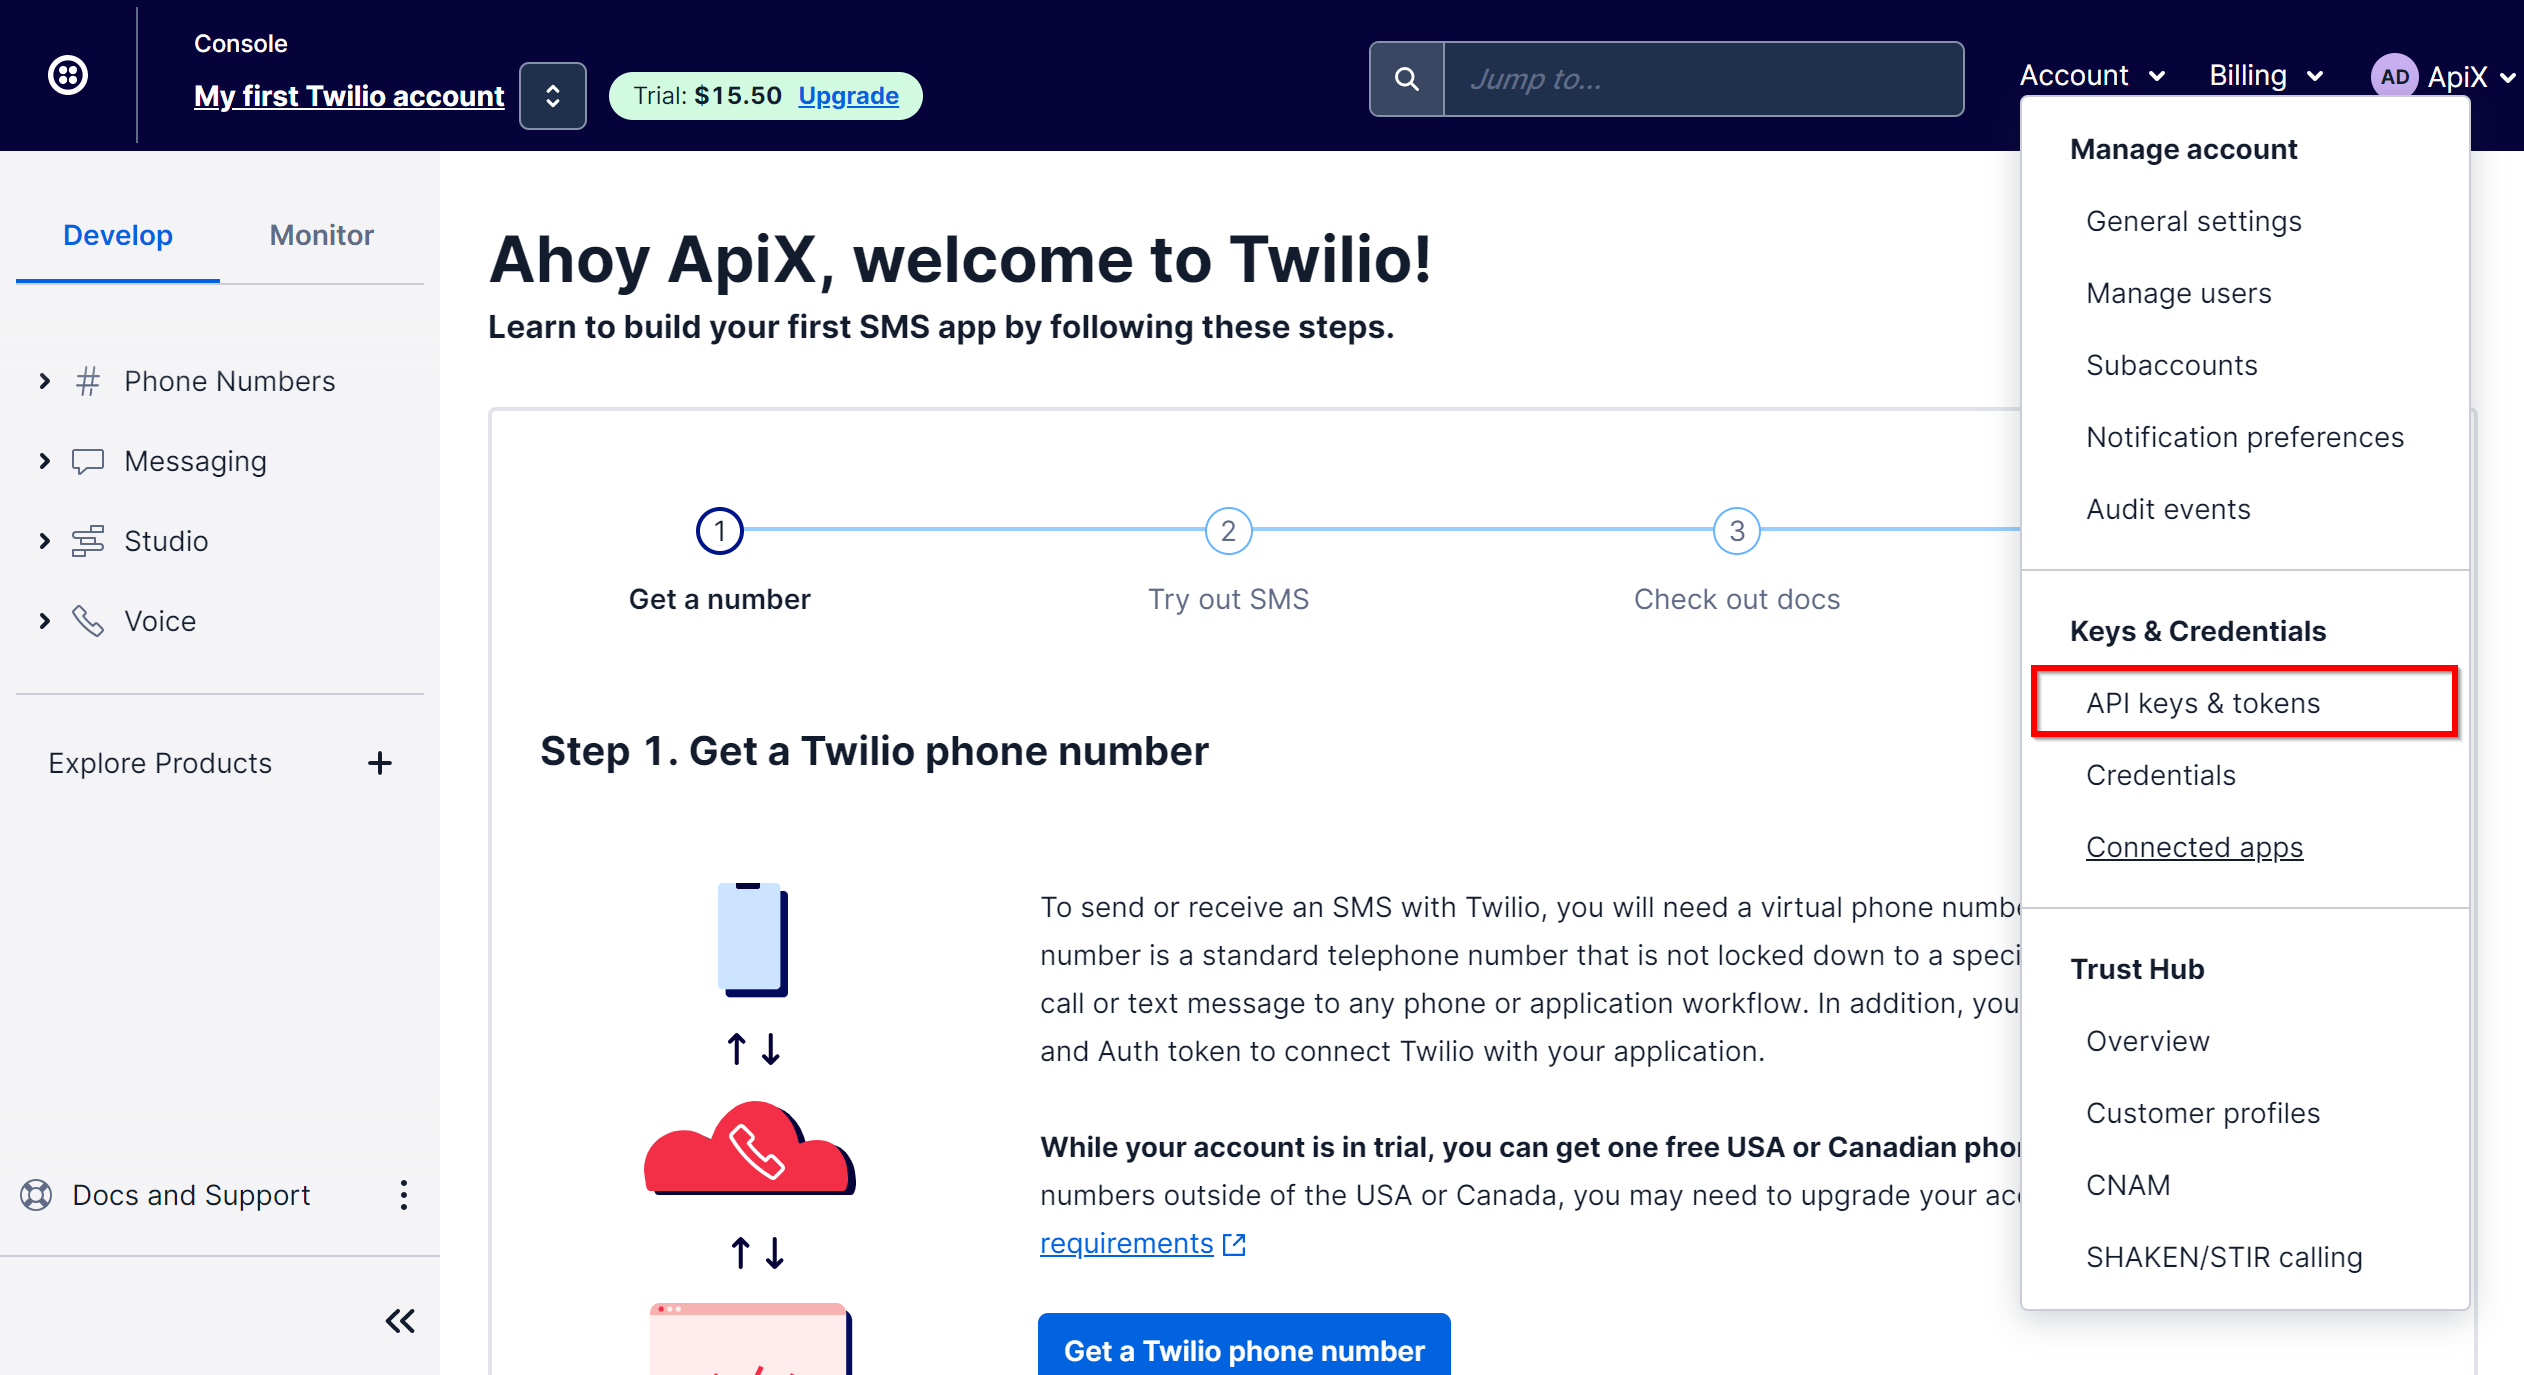 How to Connect Twilio as Data Destination | Account connection